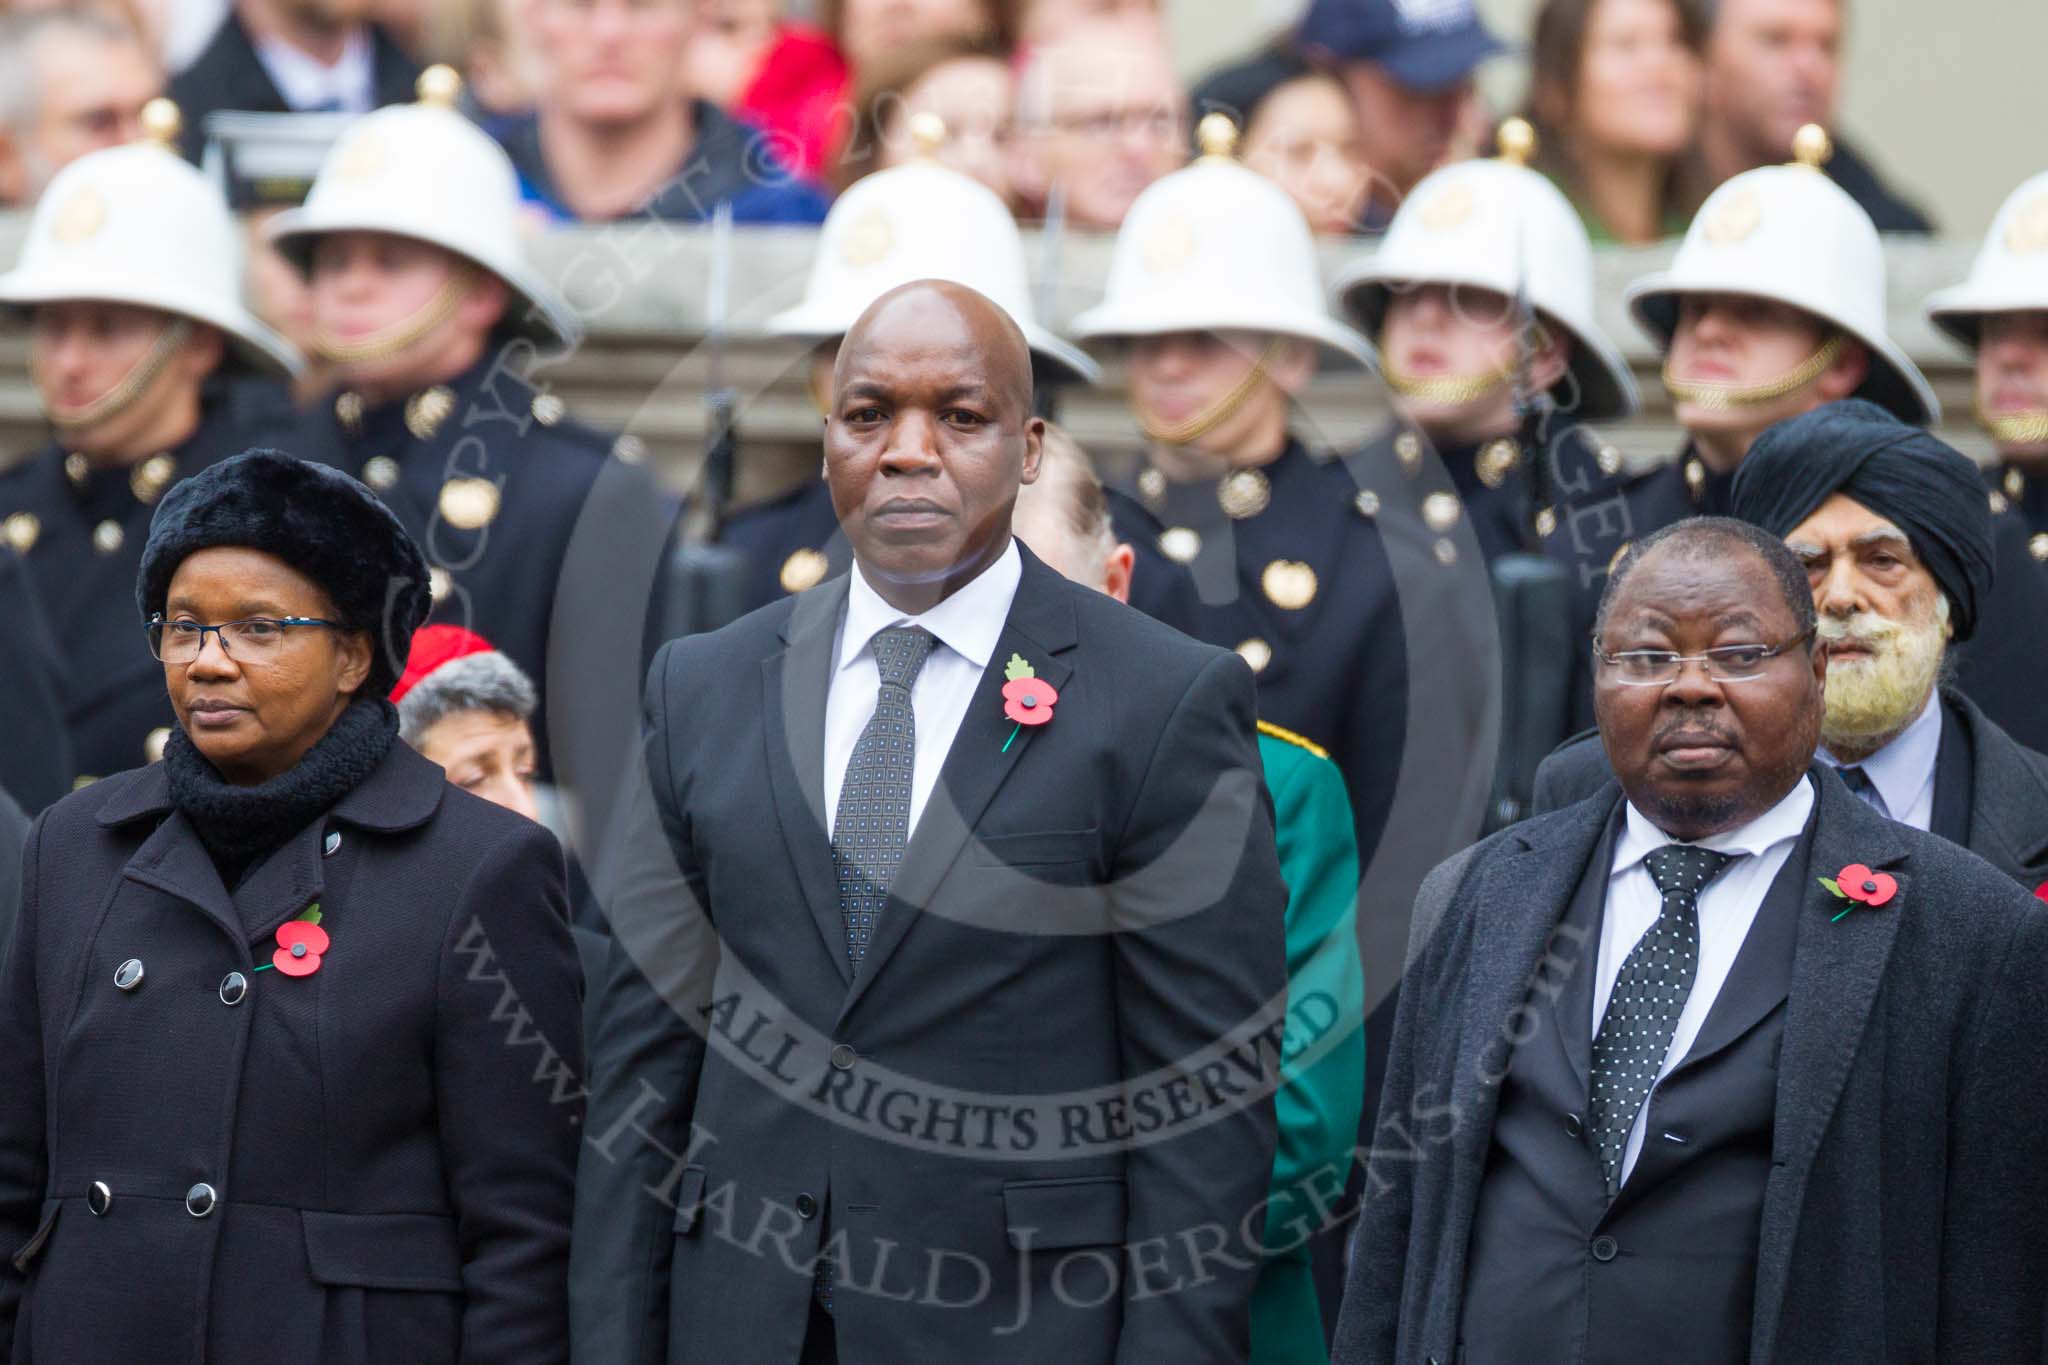 Remembrance Sunday at the Cenotaph 2015: The Minister Counsellor of Jamaica, the High Commissioner of Tanzania, and the Acting High Commissioner of Sierra Leone standing at the Cenotaph. Image #311, 08 November 2015 11:19 Whitehall, London, UK